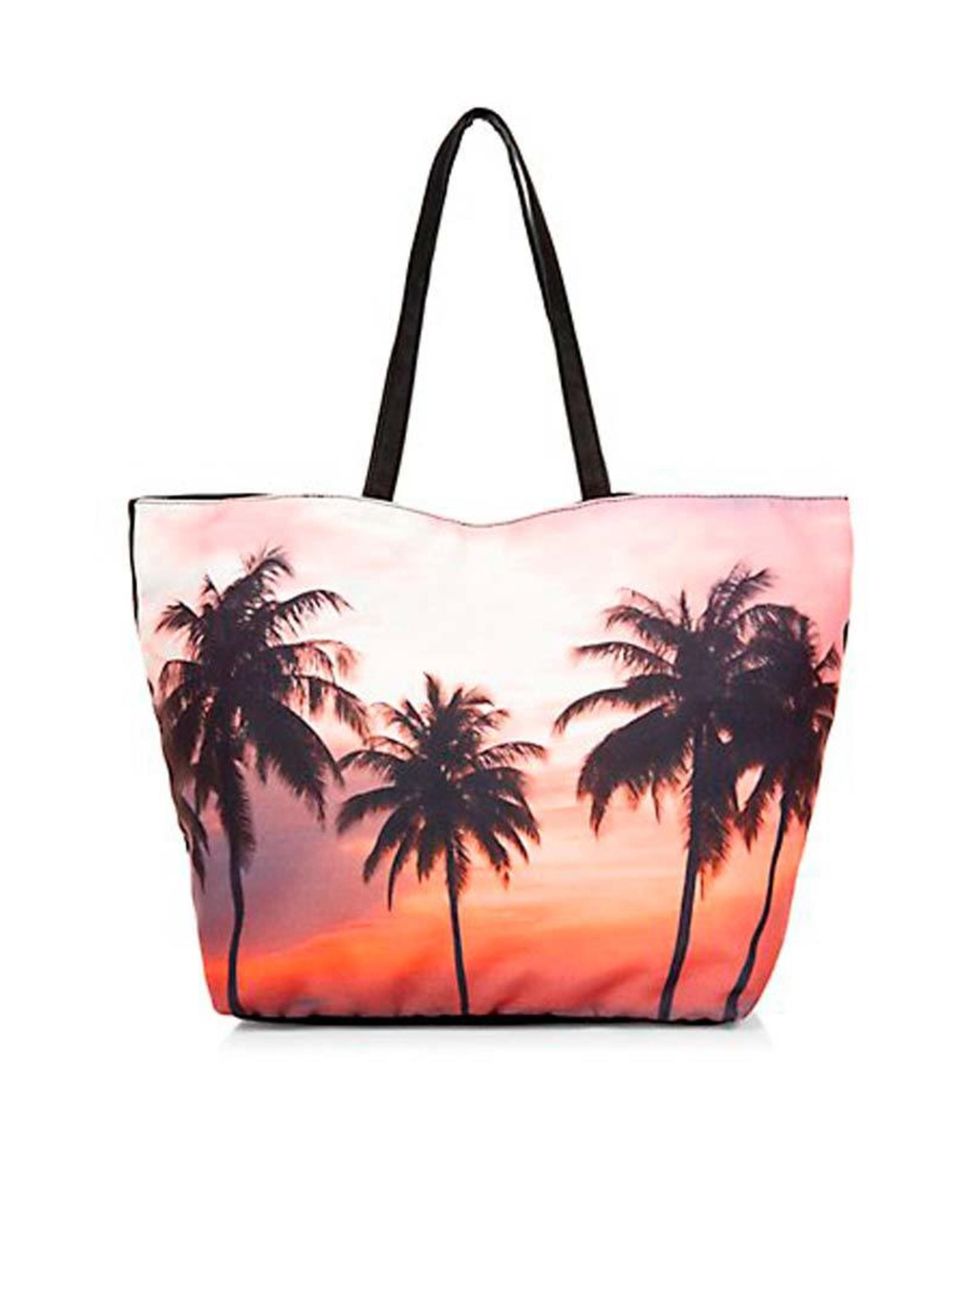 <p>Sunset.. </p><p>Palm print tote £12.99 from <a href="http://www.newlook.com/shop/womens/bags-and-purses/pink-palm-tree-shopper-bag-_298237299">New Look</a></p>